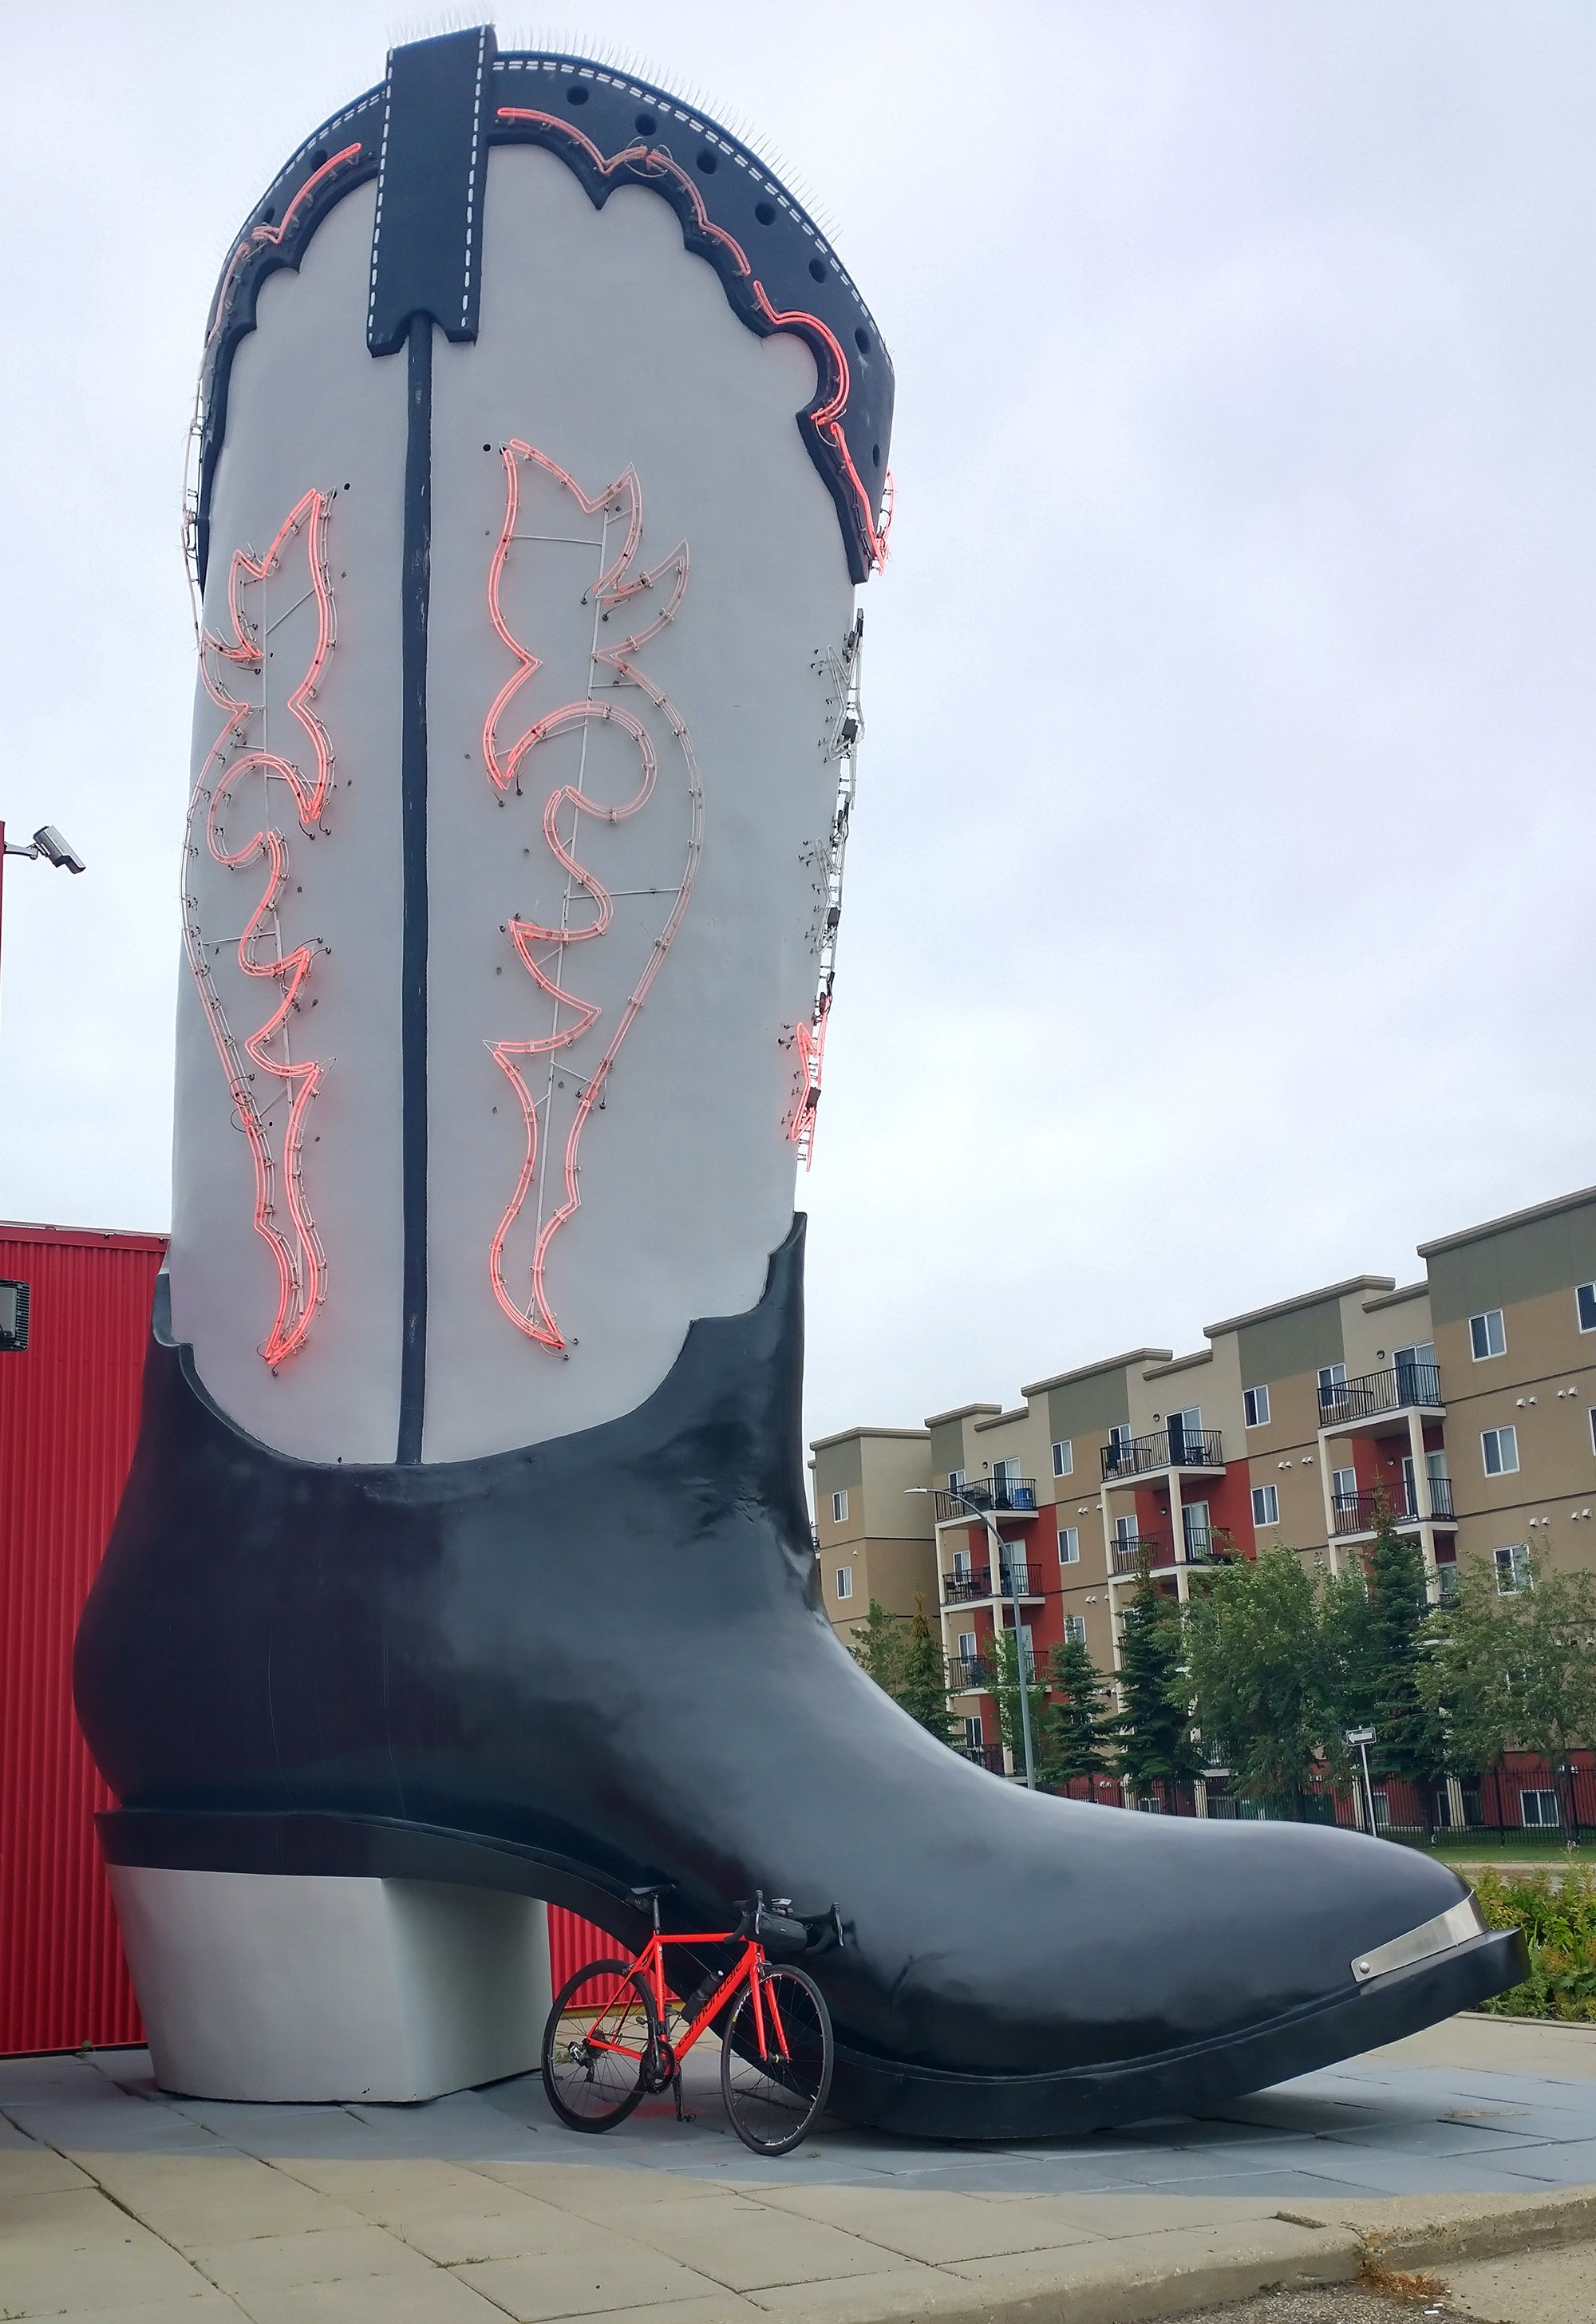 World's Largest Boot, at a biker store.